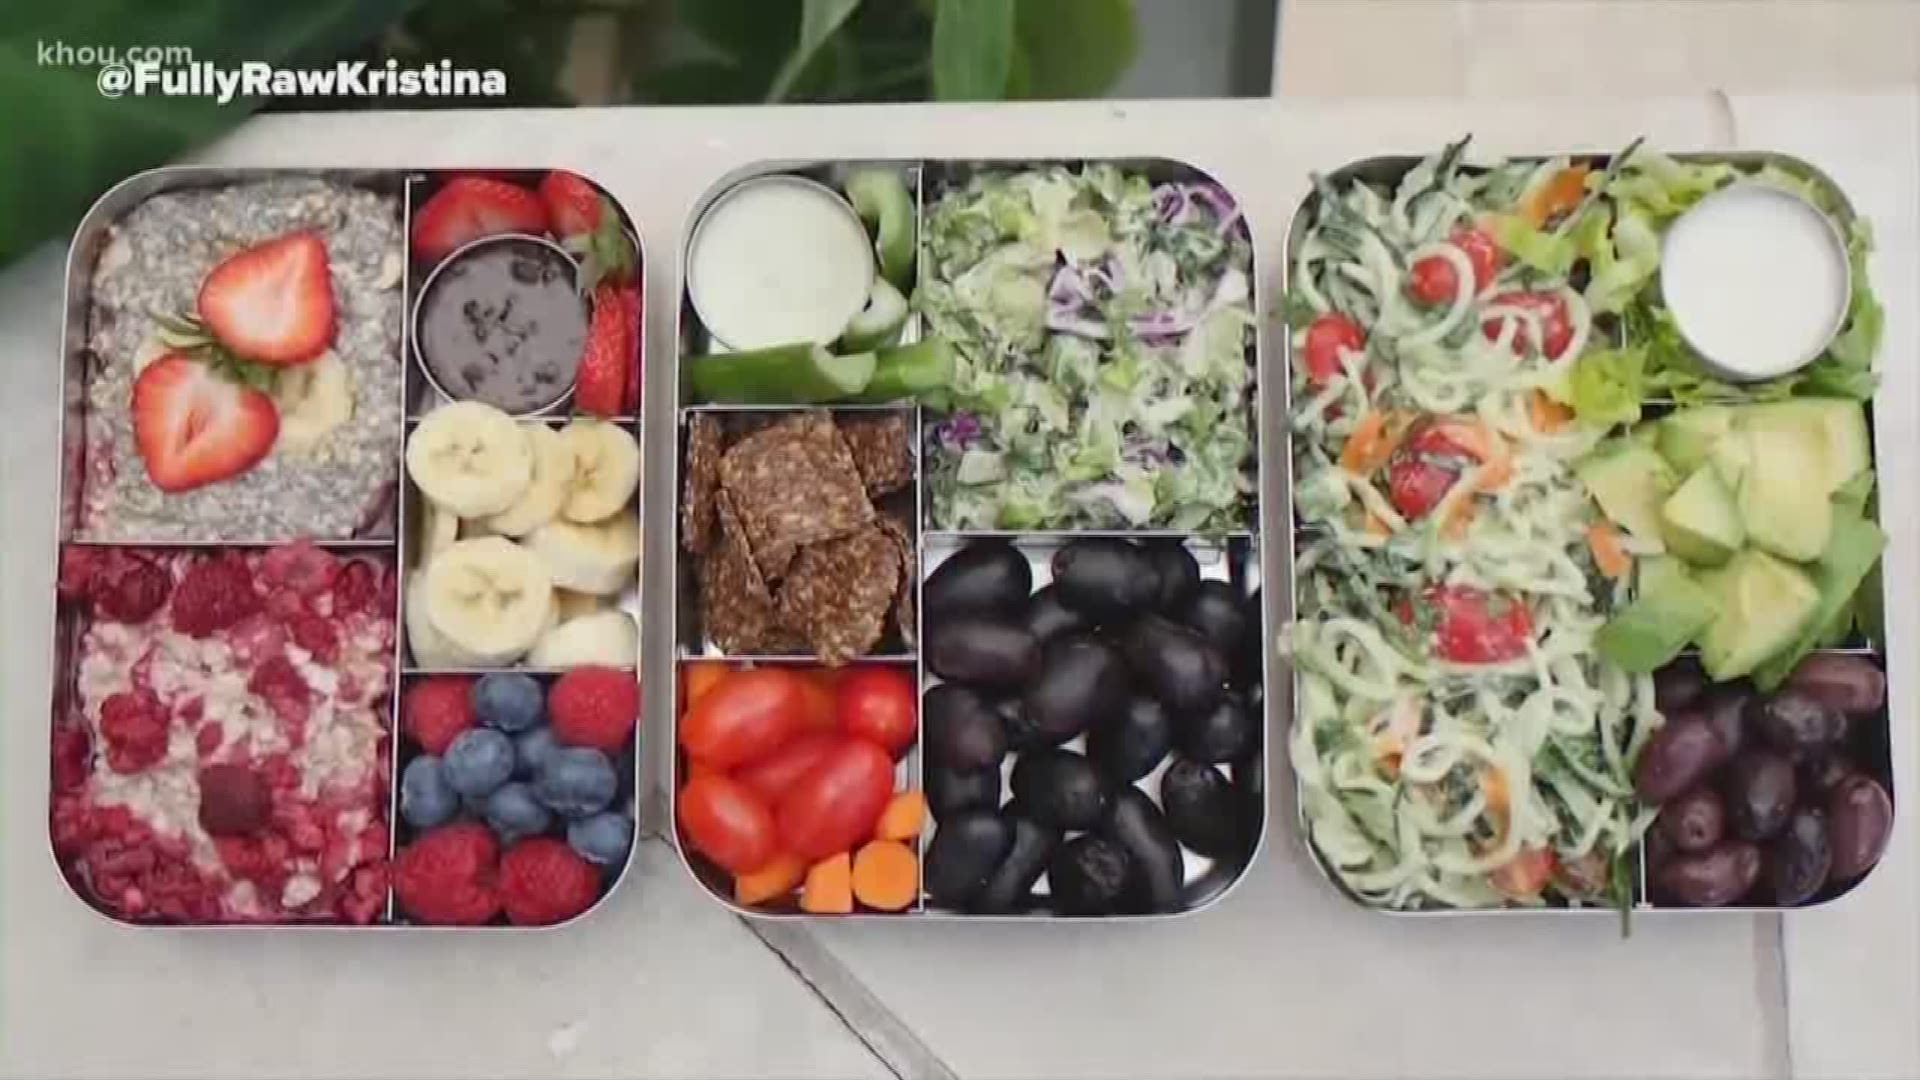 These grab-and-go bento box recipes pack in healthy greens and veggies. The recipe comes from YouTube star Kristina Bucaram who lives in Houston. They are all vegan approved!